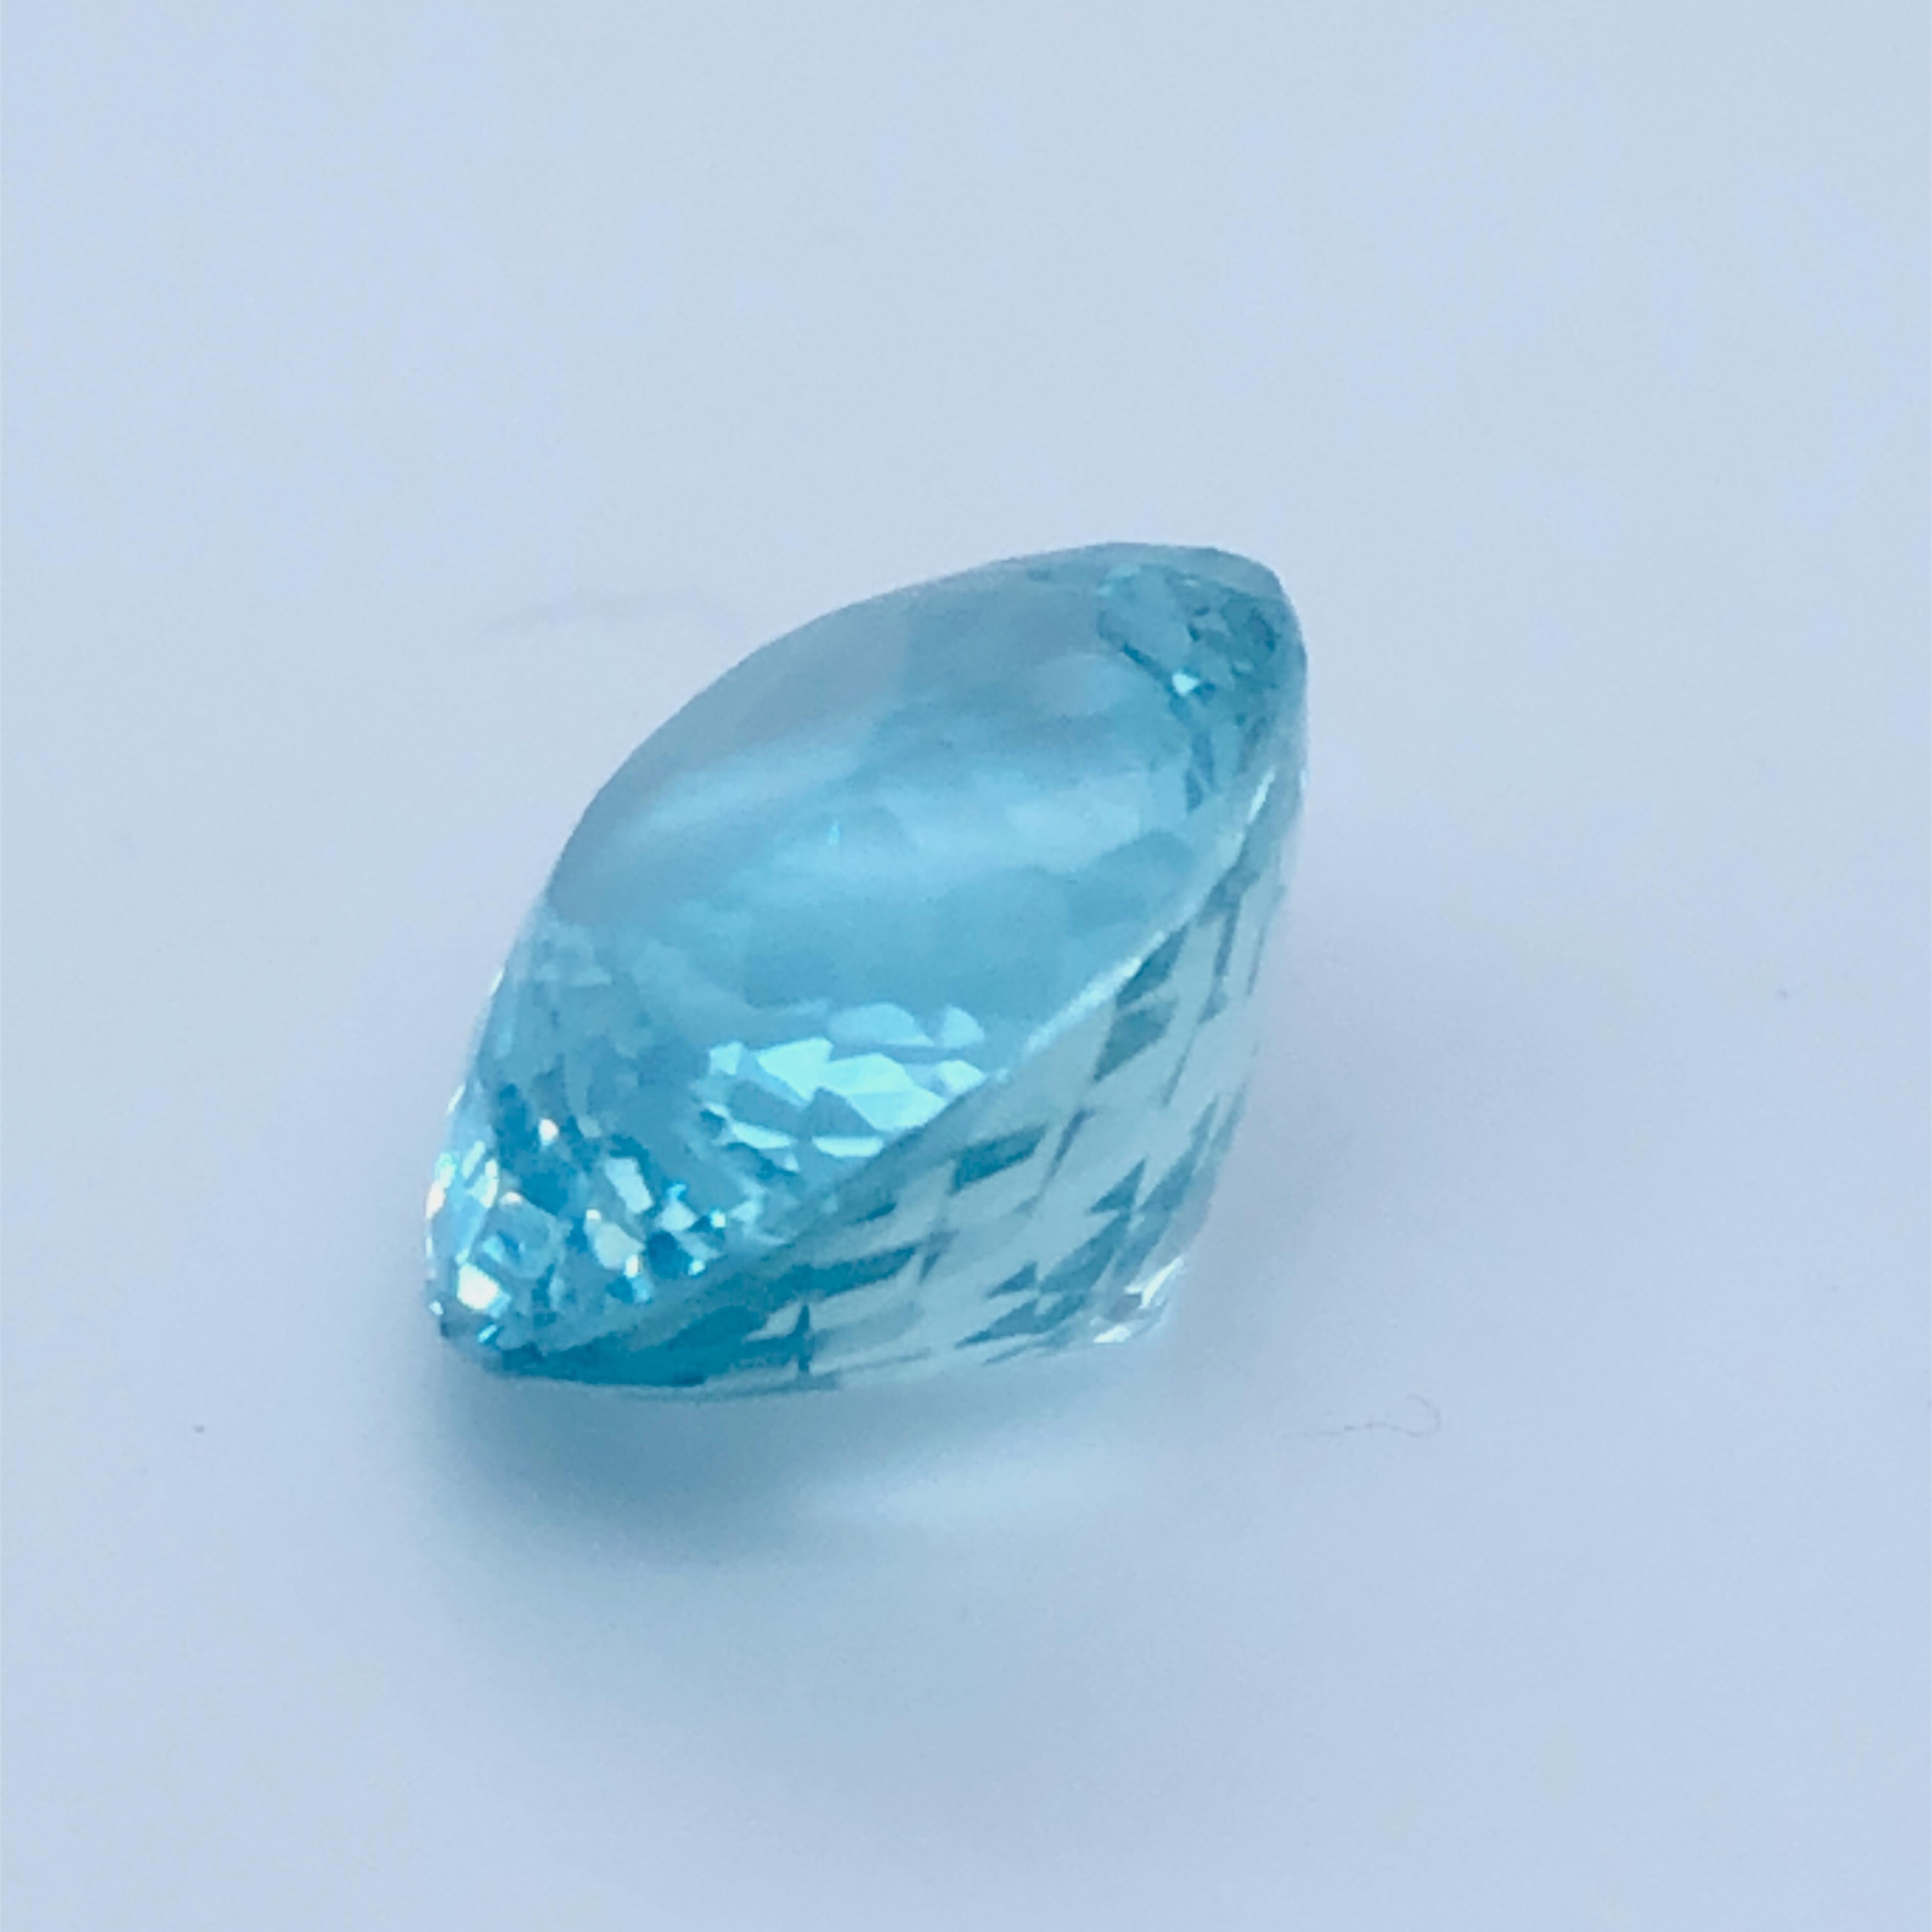 Awesome 8.43Kt (14.76x12.06x8.38mm) very brilliant Oval mixed cut Natural Trasparent Greenish Blue Aquamarine.
As stated in IGI Certicate 514256107 February 4 2022, that will be included, this stone is a natural Beryl.
22011702023001 GIT(the gem and